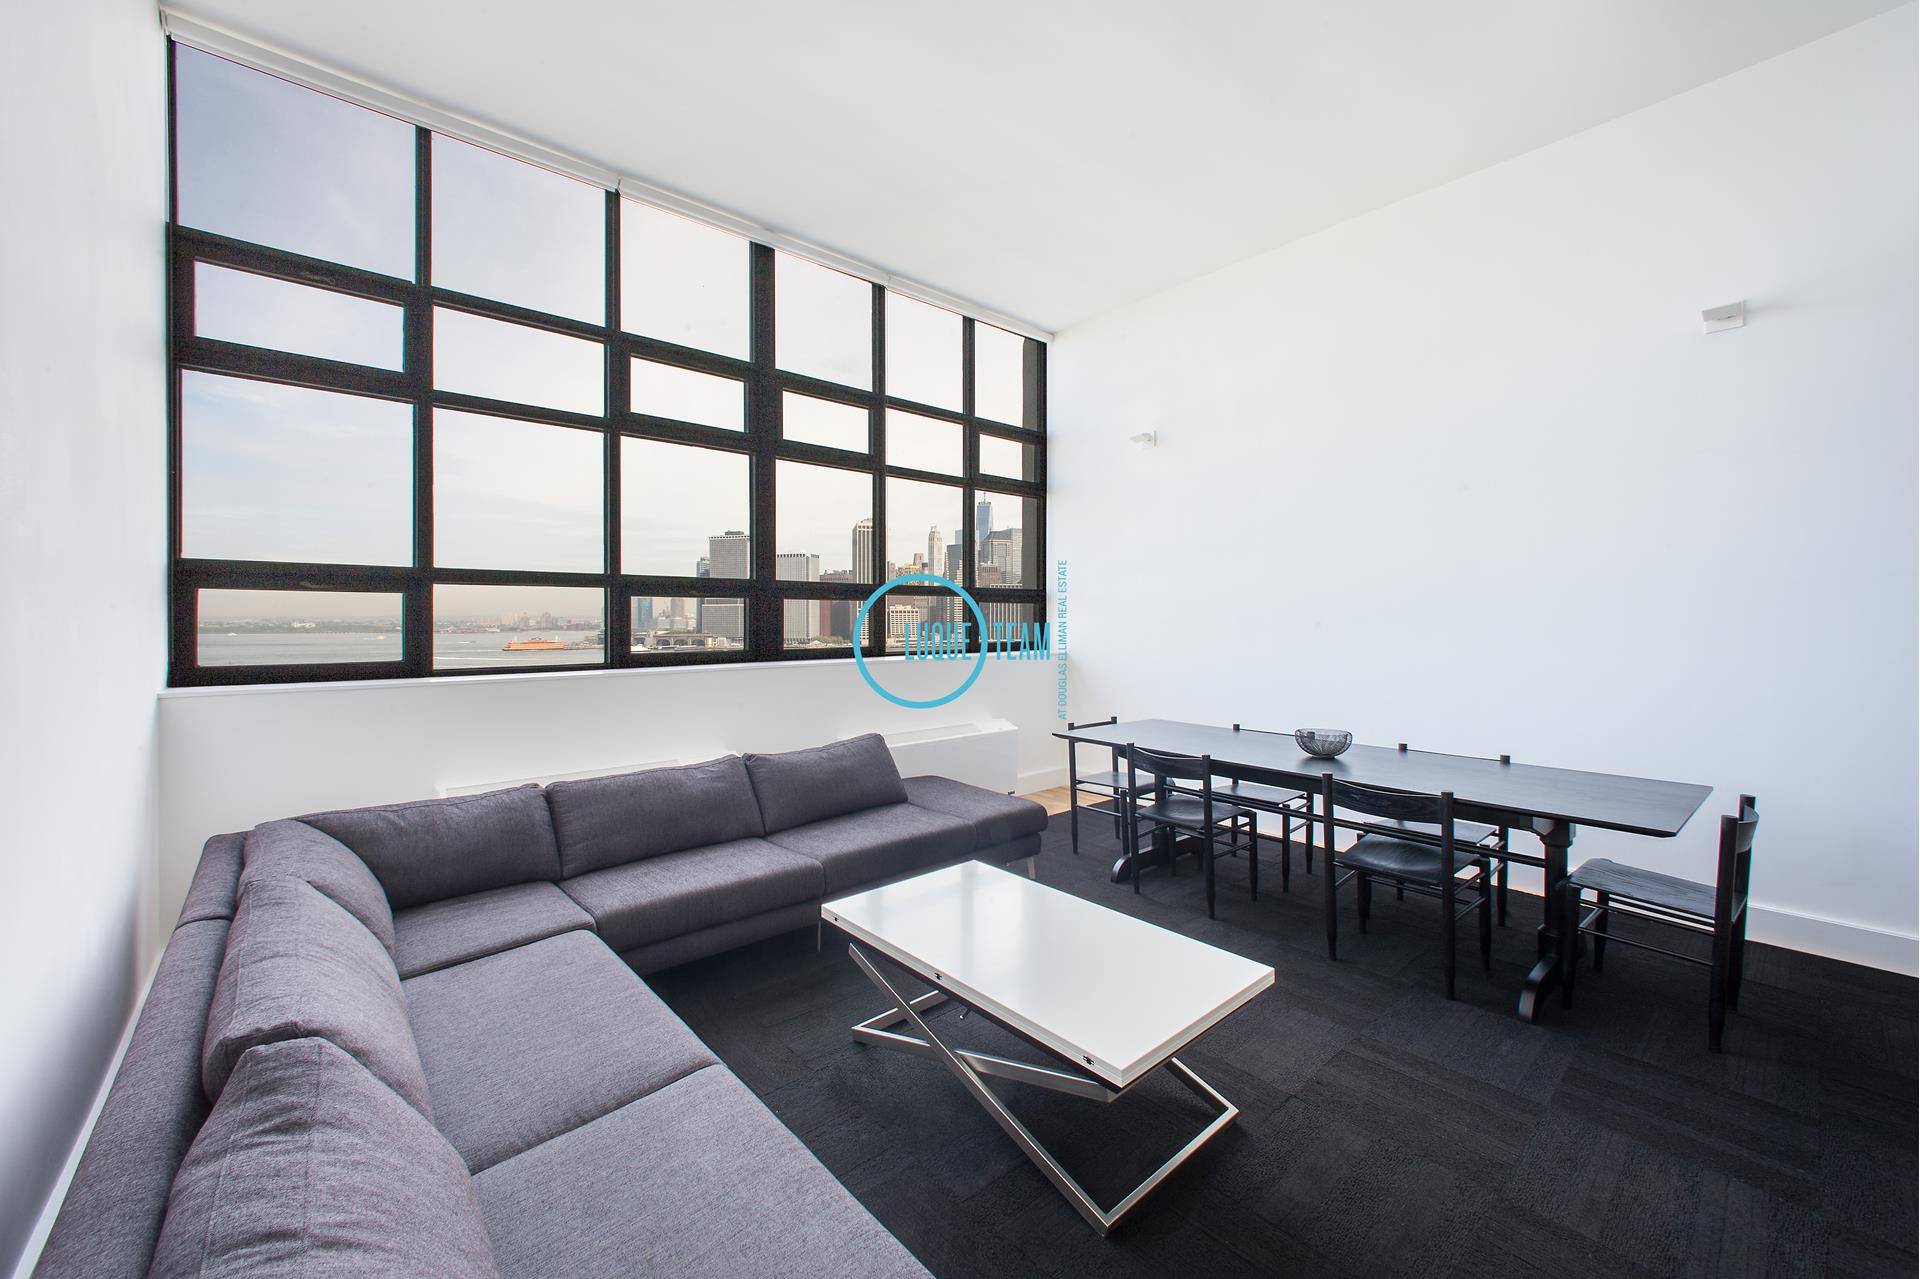 Available FURNISHED or UNFURNISHEDAmazing OPEN Water and Manhattan Views from this gorgeous large loft studio with a separate den sleeping area, soaring 13ft ceilings on the 10th floor.